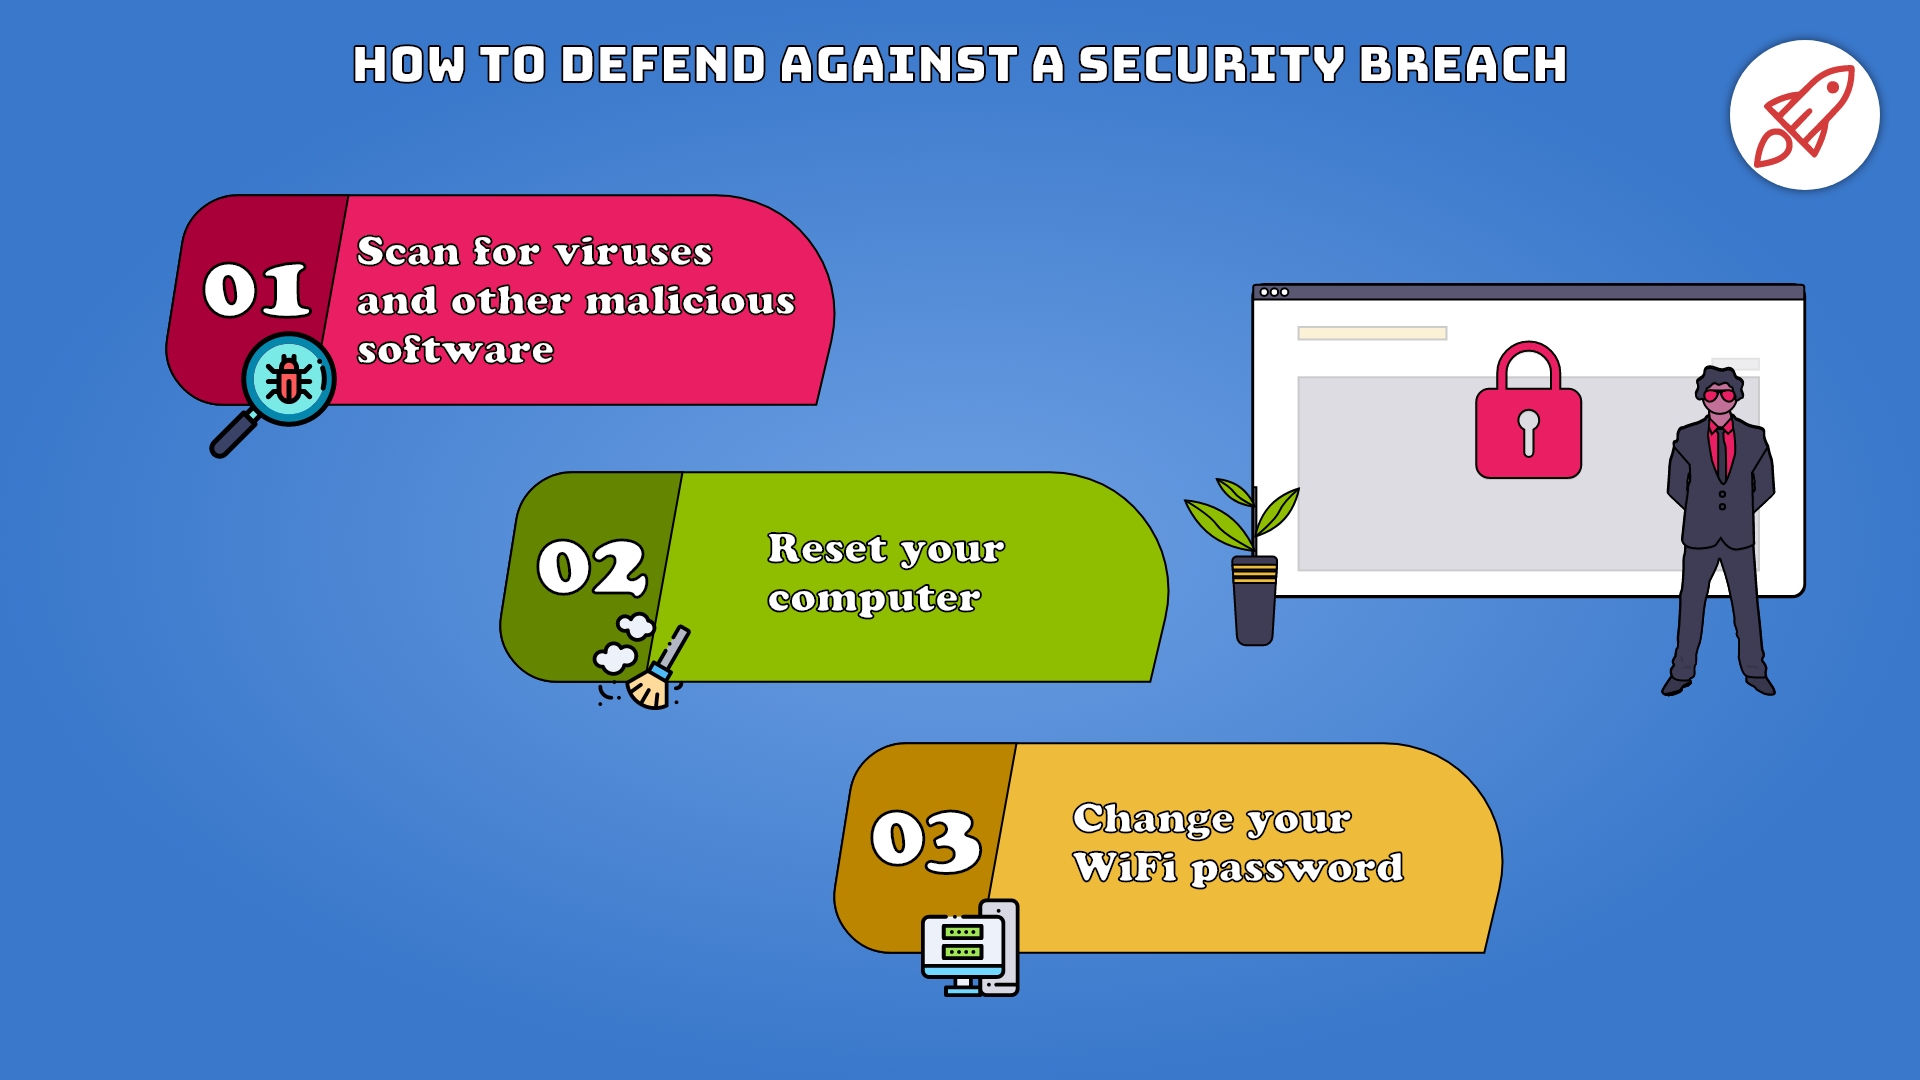 How to defend yourself against a security breach